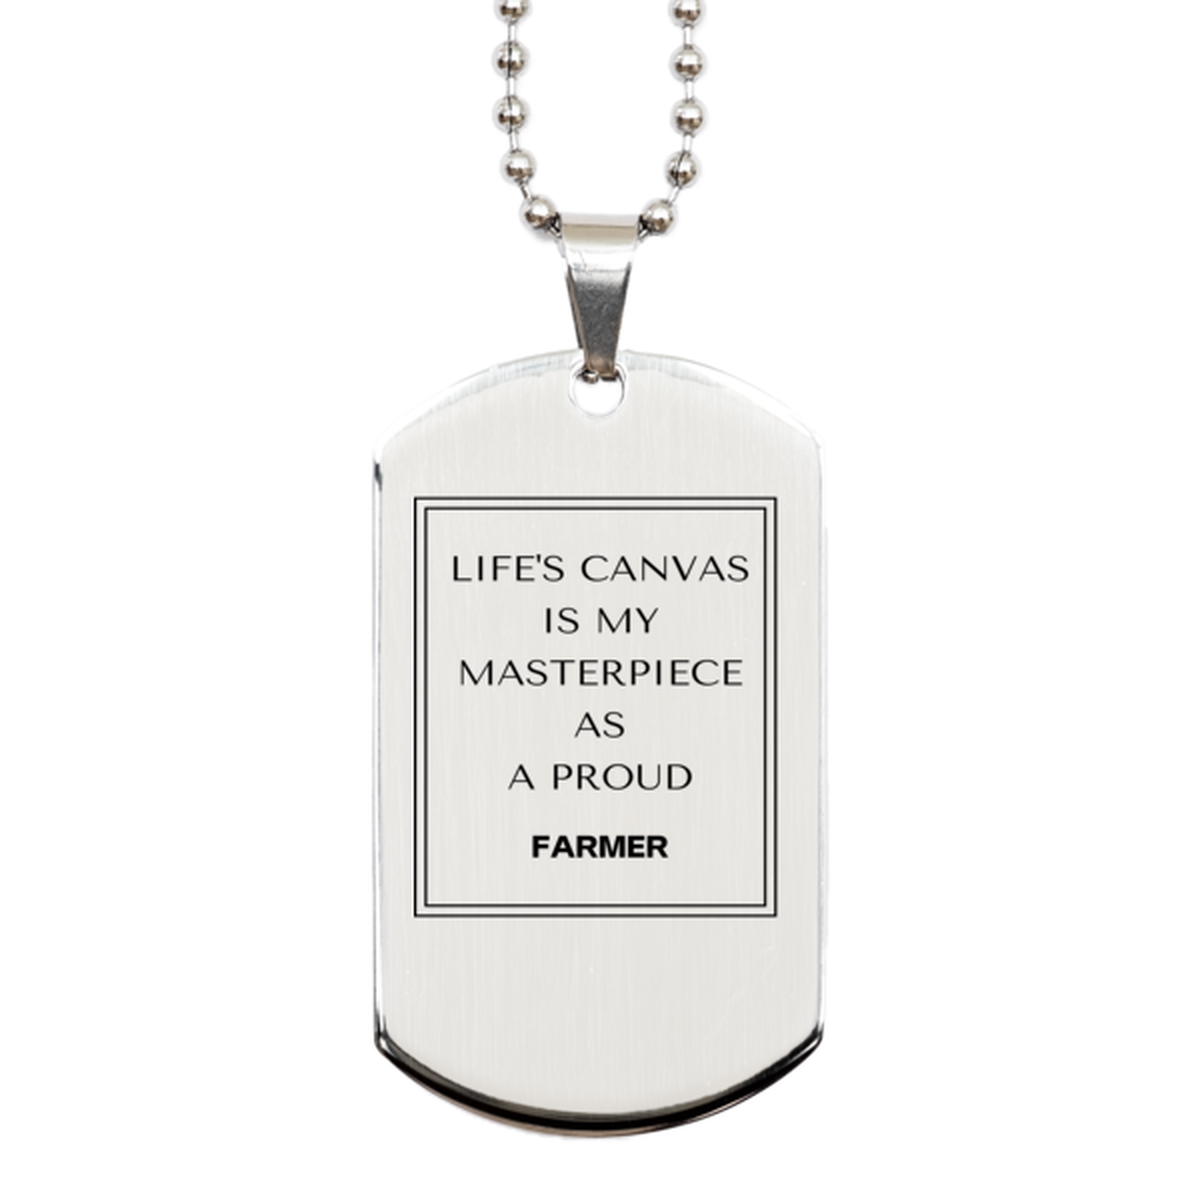 Proud Farmer Gifts, Life's canvas is my masterpiece, Epic Birthday Christmas Unique Silver Dog Tag For Farmer, Coworkers, Men, Women, Friends